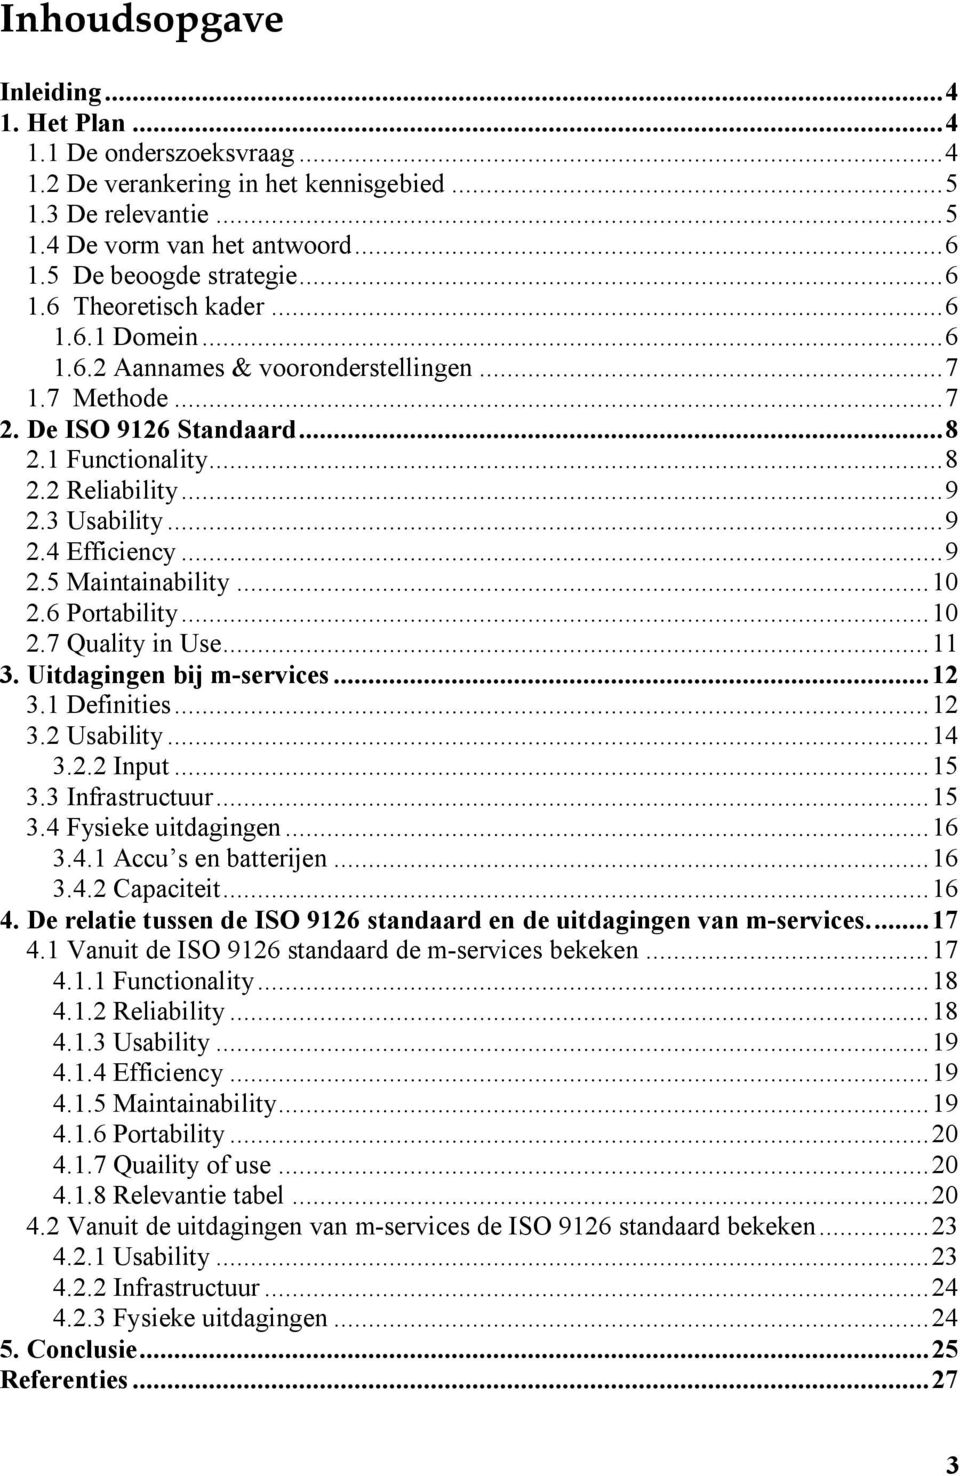 .. 9 2.3 Usability... 9 2.4 Efficiency... 9 2.5 Maintainability... 10 2.6 Portability... 10 2.7 Quality in Use... 11 3. Uitdagingen bij m-services... 12 3.1 Definities... 12 3.2 Usability... 14 3.2.2 Input.